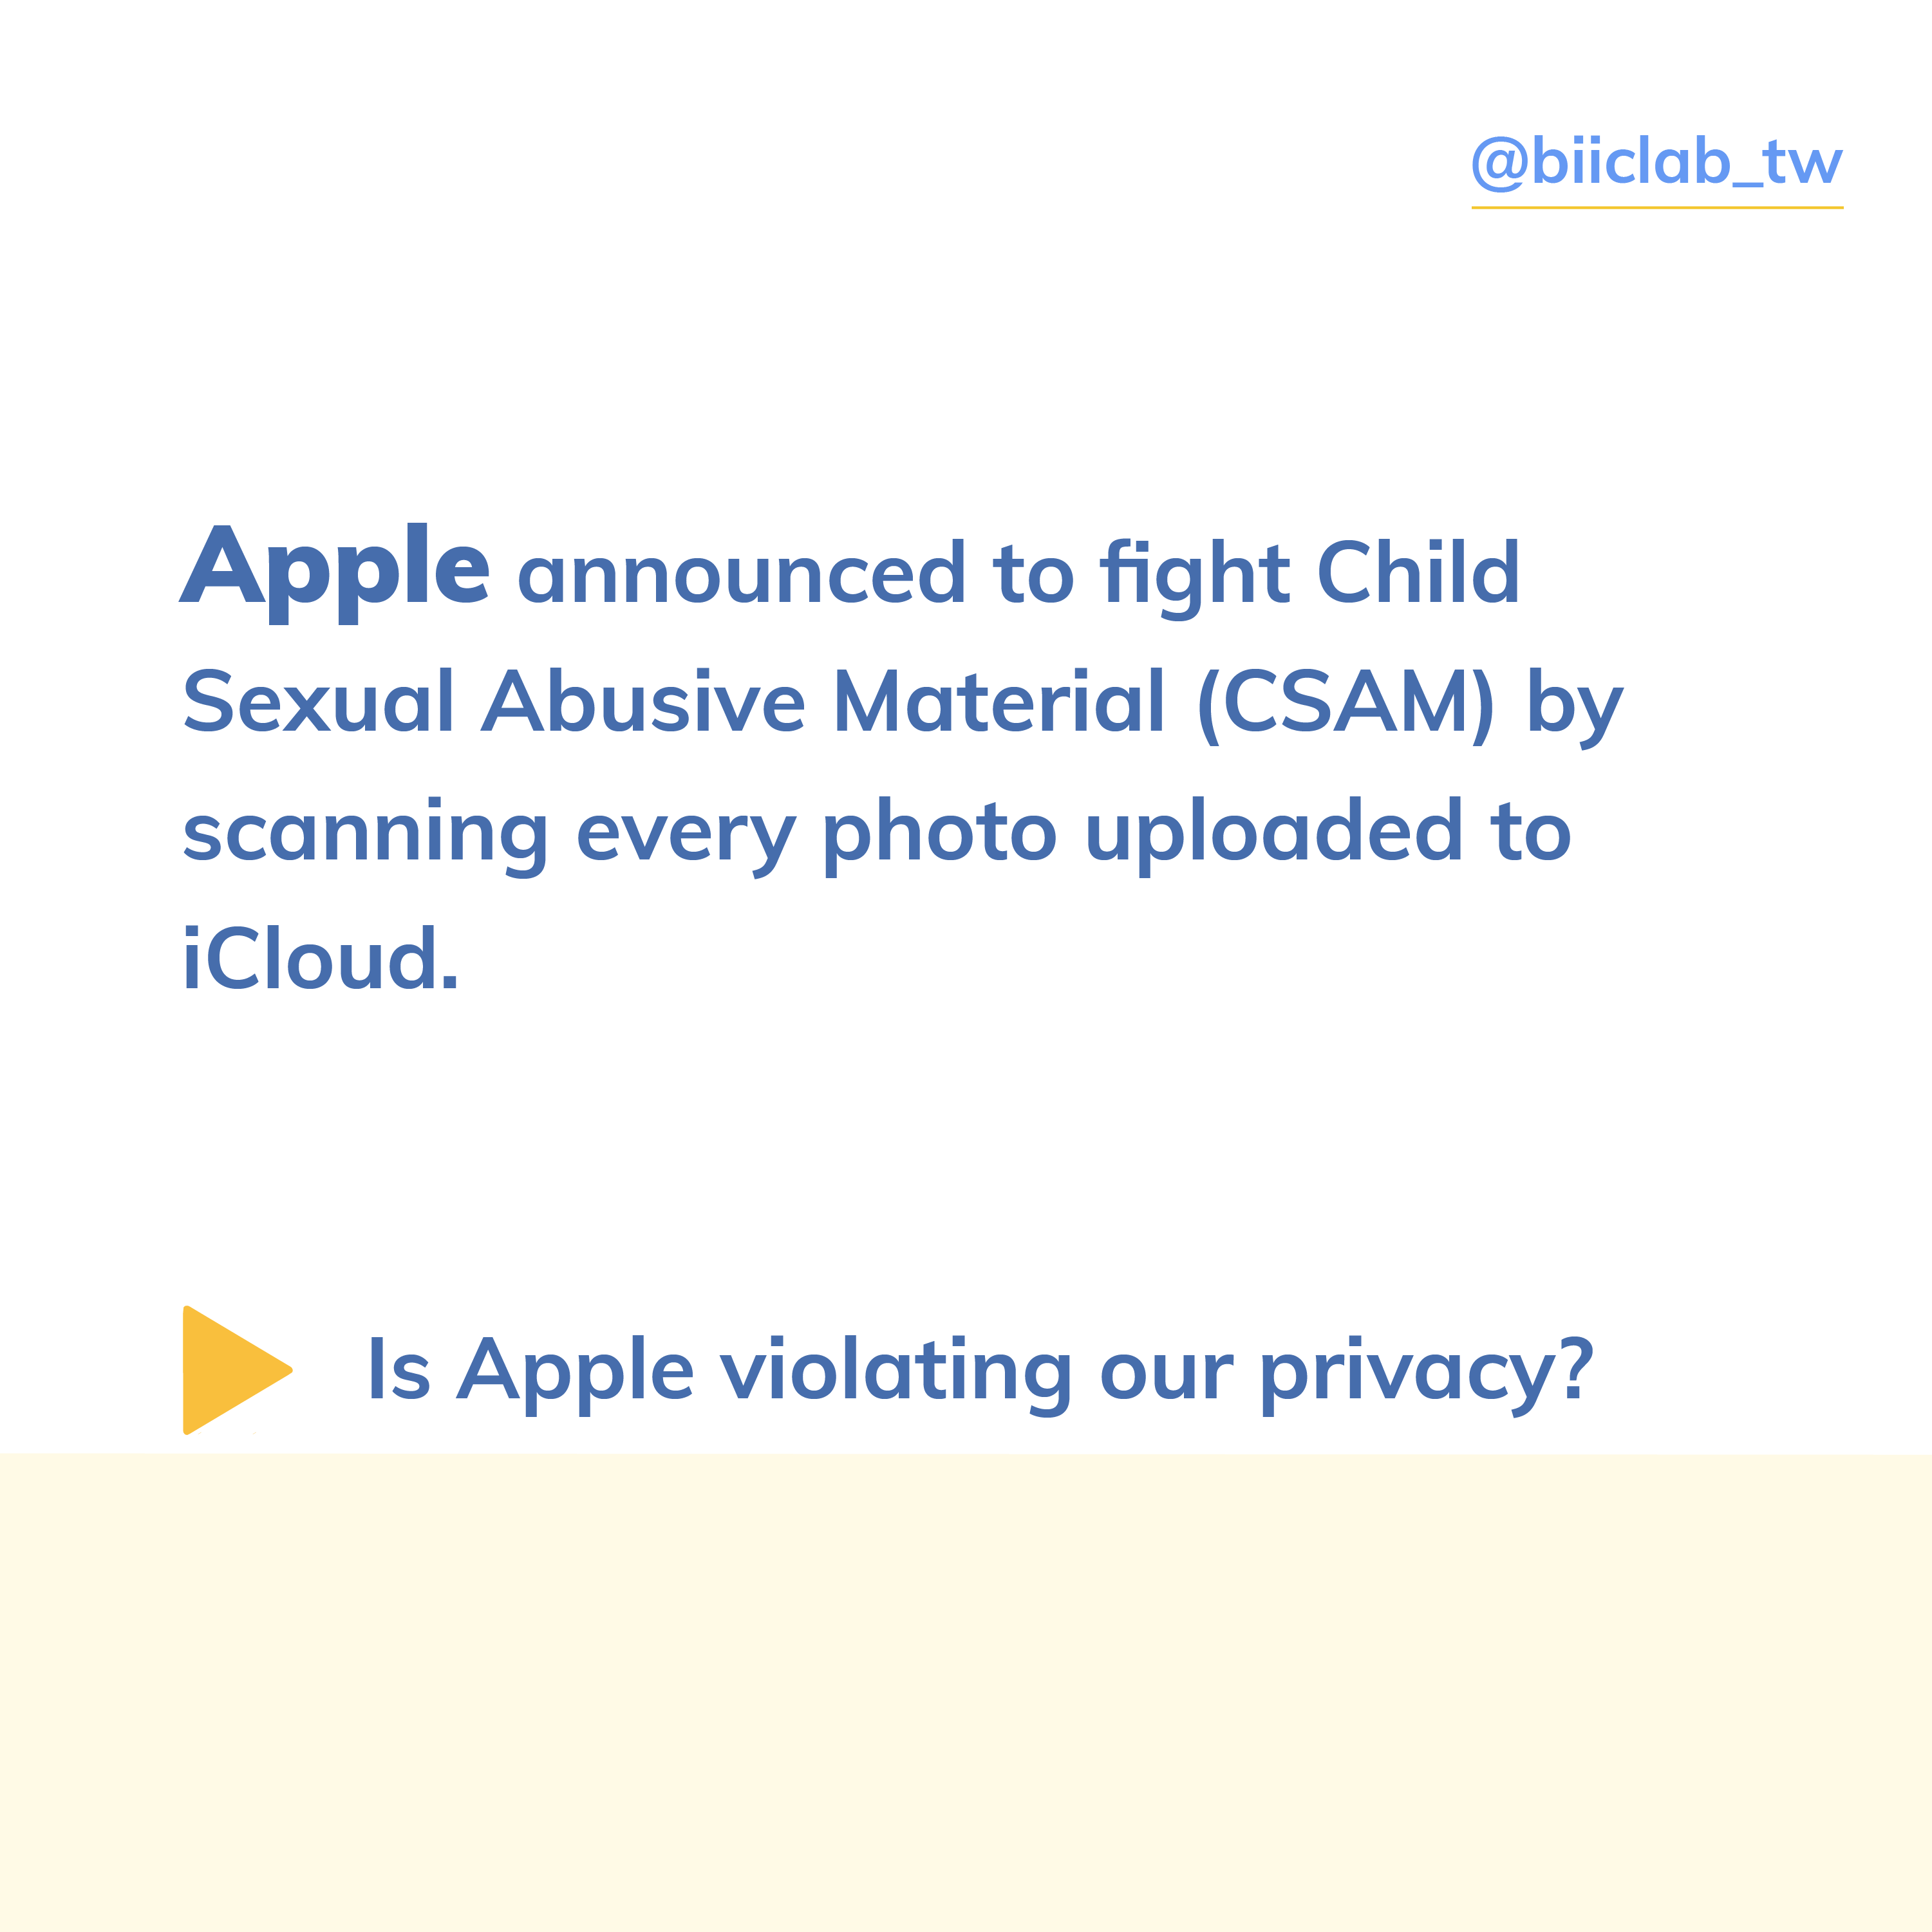 Is Apple violating our privacy?